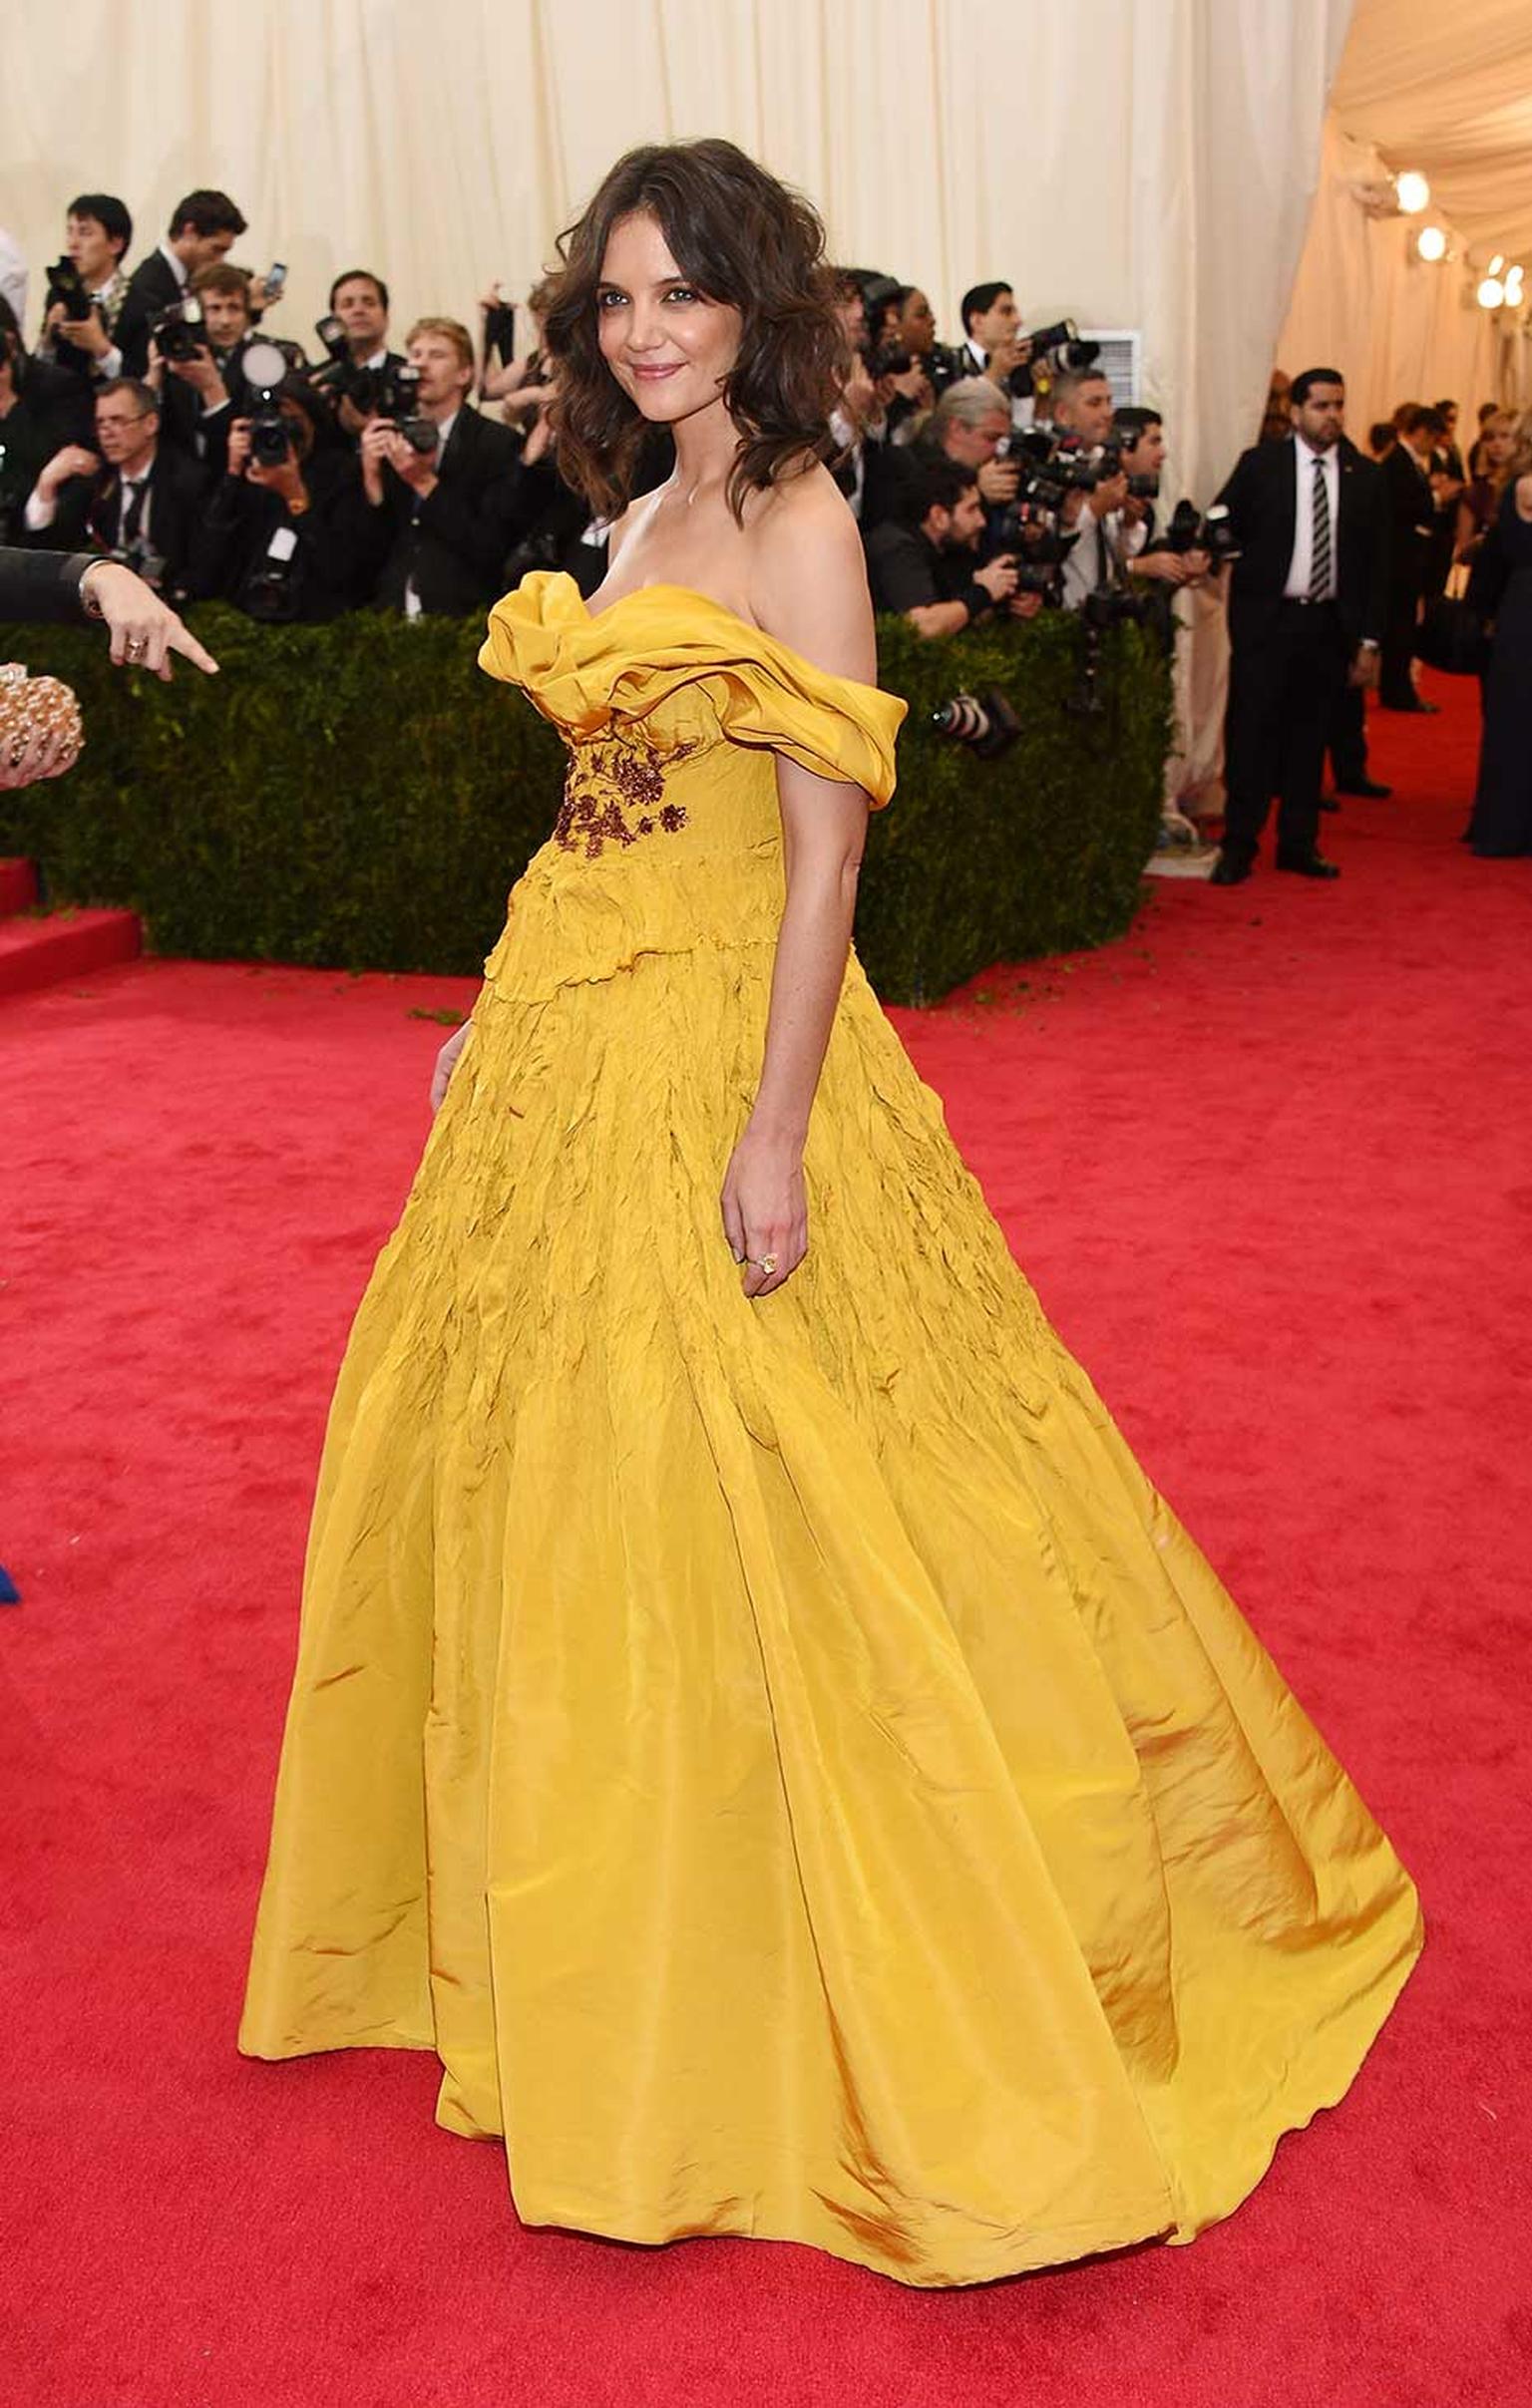 Katie Holmes coordinated her jewels with her yellow Marchesa gown: more than $2 million of Harry Winston yellow diamonds